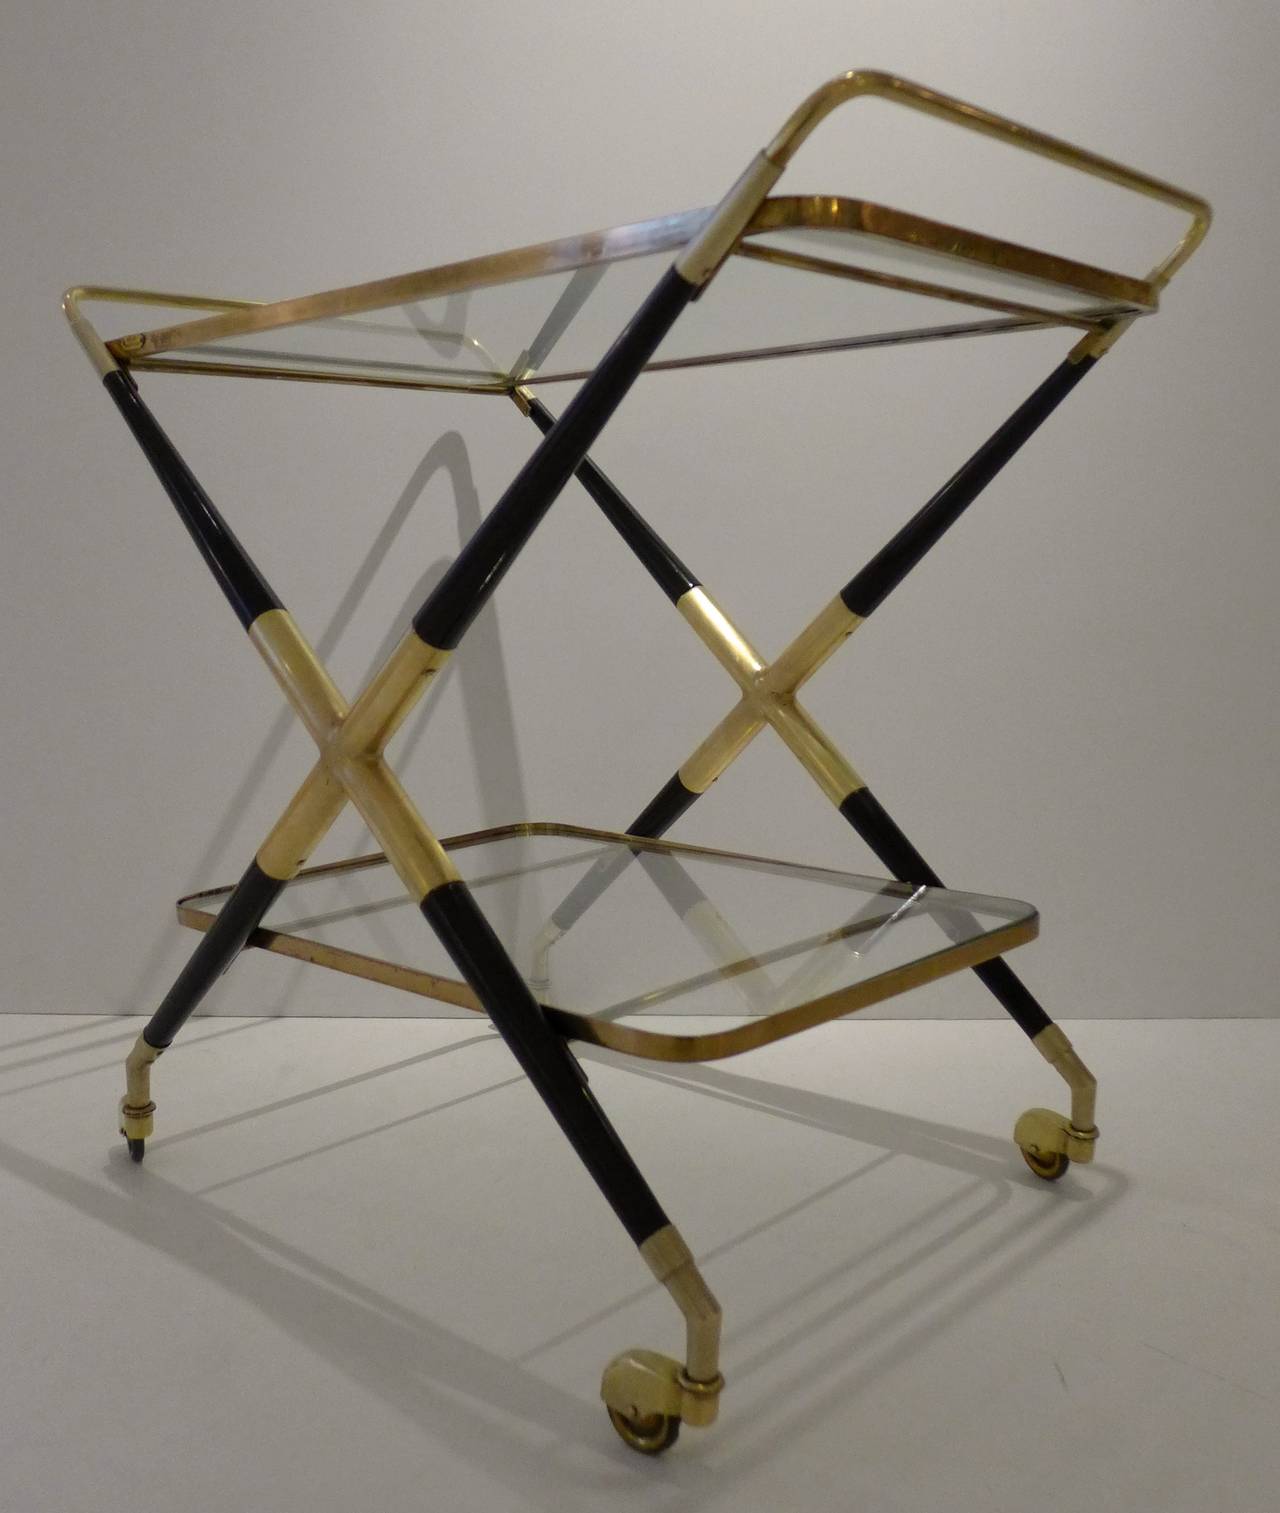 Bar cart or trolley in brass, walnut, and glass with metal casters.  Made in Italy, c. 1950's.  This design is usually assigned to Cesare Lacca.  With a metal 